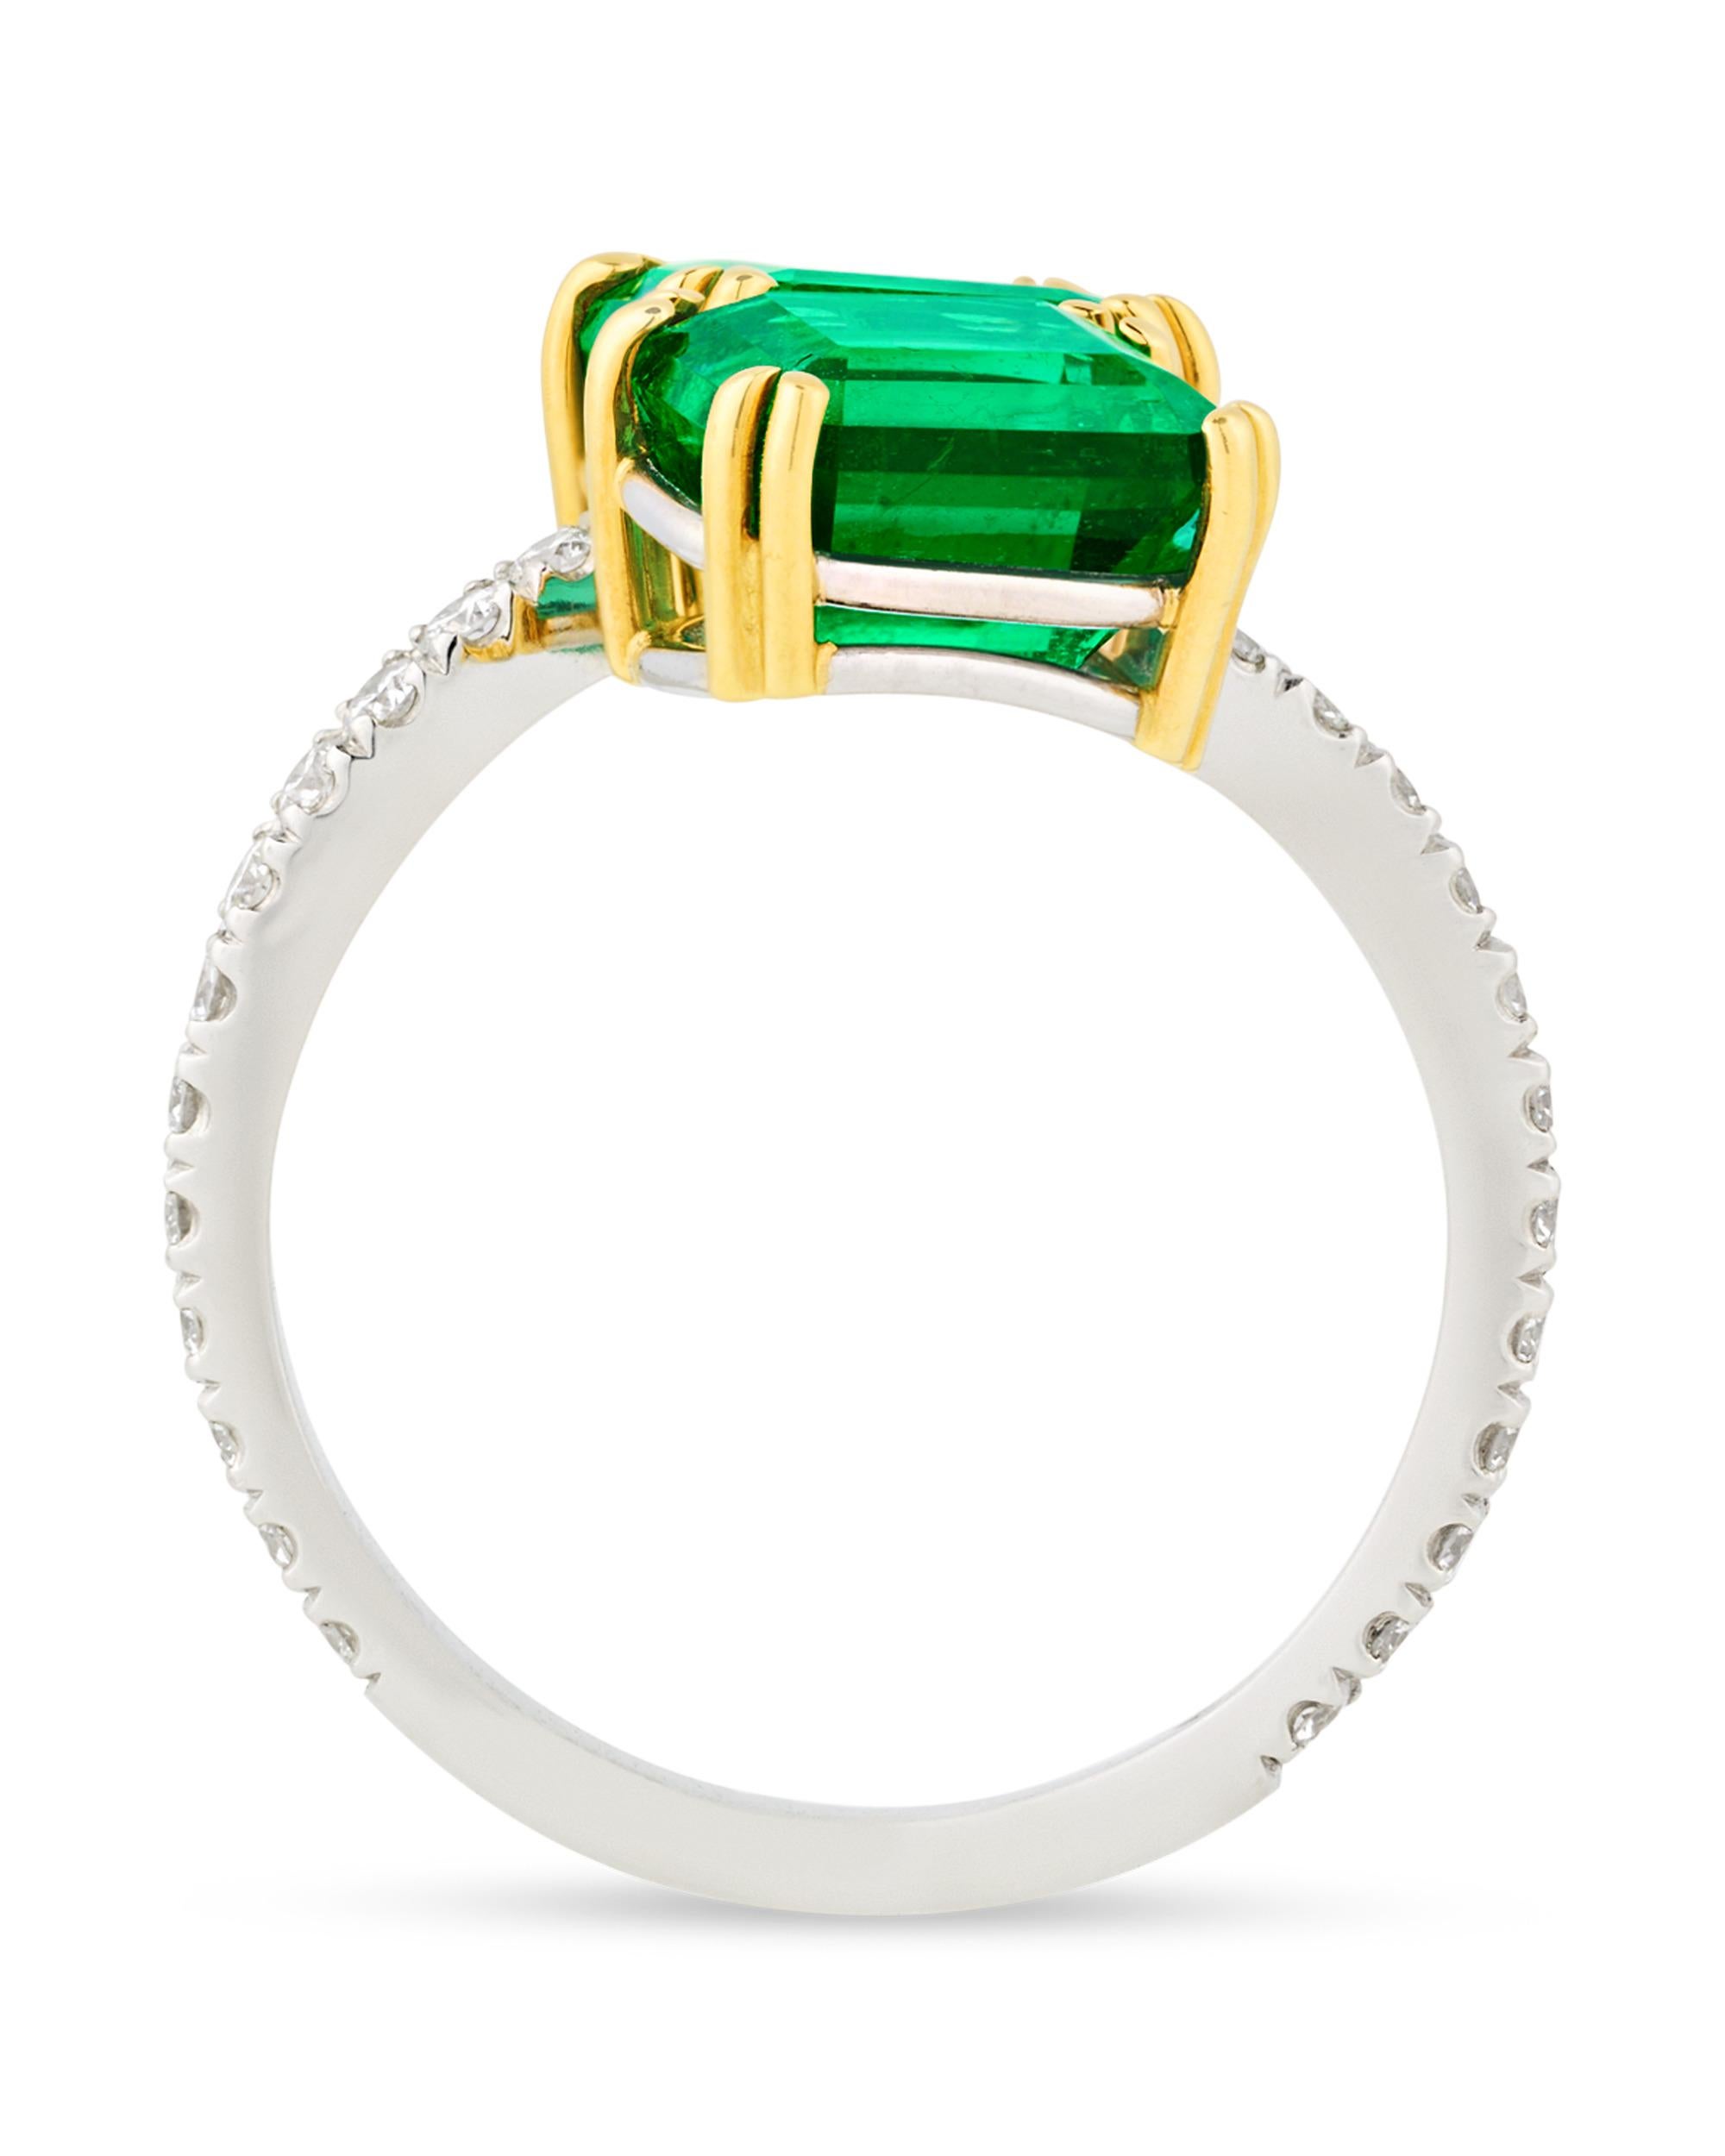 Taking a unique bypass design, this elegant ring features two verdant green emeralds. Certified by the American Gemological Laboratories as originating in Zambia, the emerald-cut gemstones weigh 2.60 carats and 2.56 carats respectively and show only